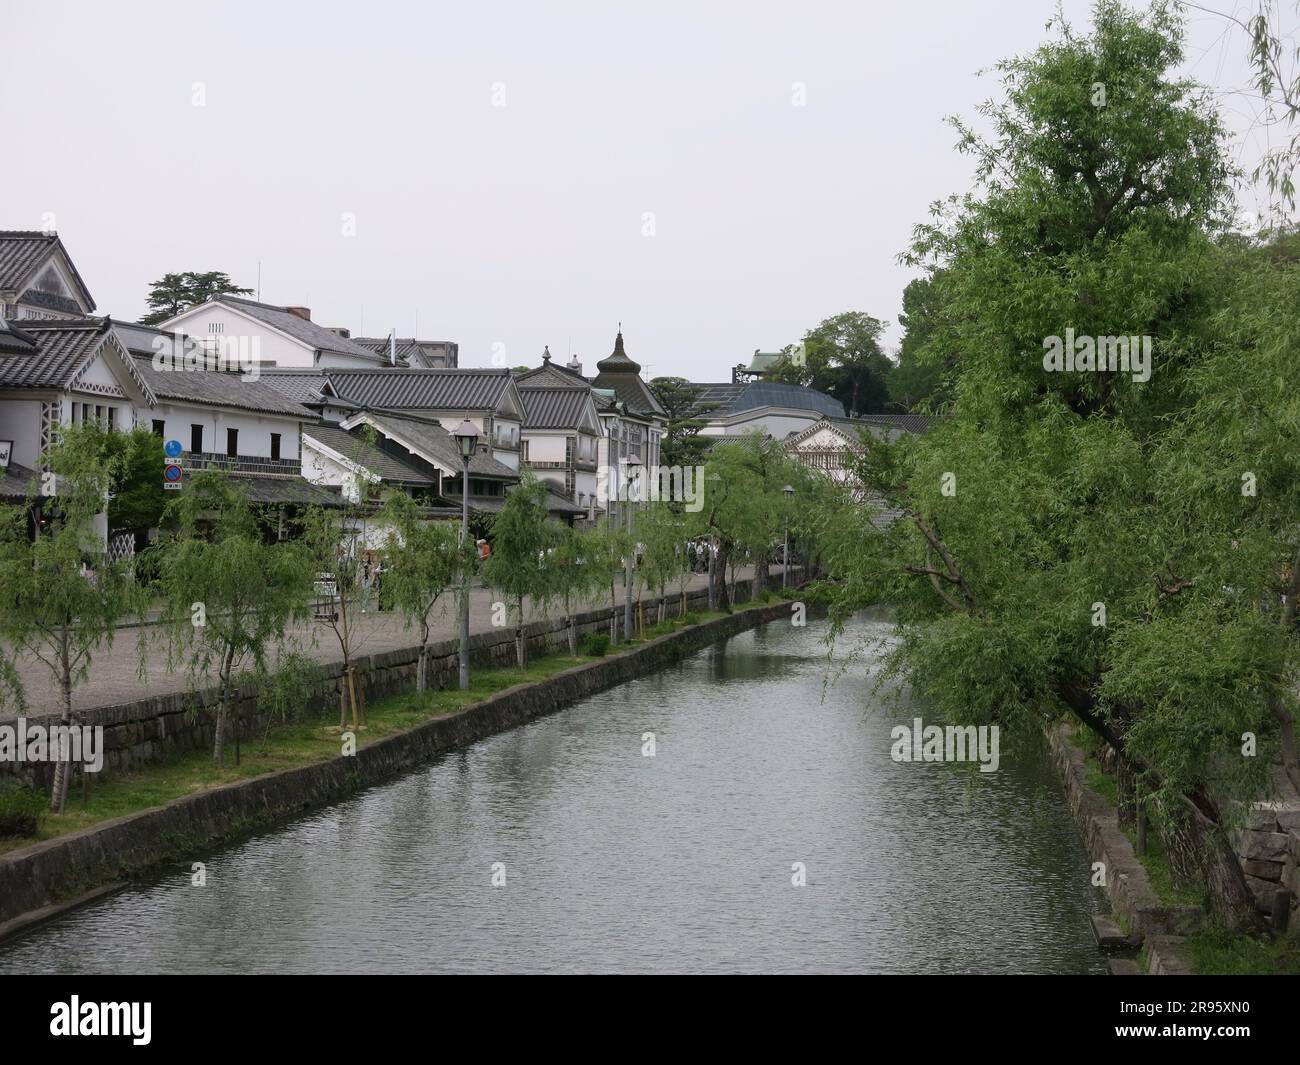 Kurashiki has a preserved canal area with the old rice warehouses painted white with black tiles, and weeping willows lining the waterside. Stock Photo